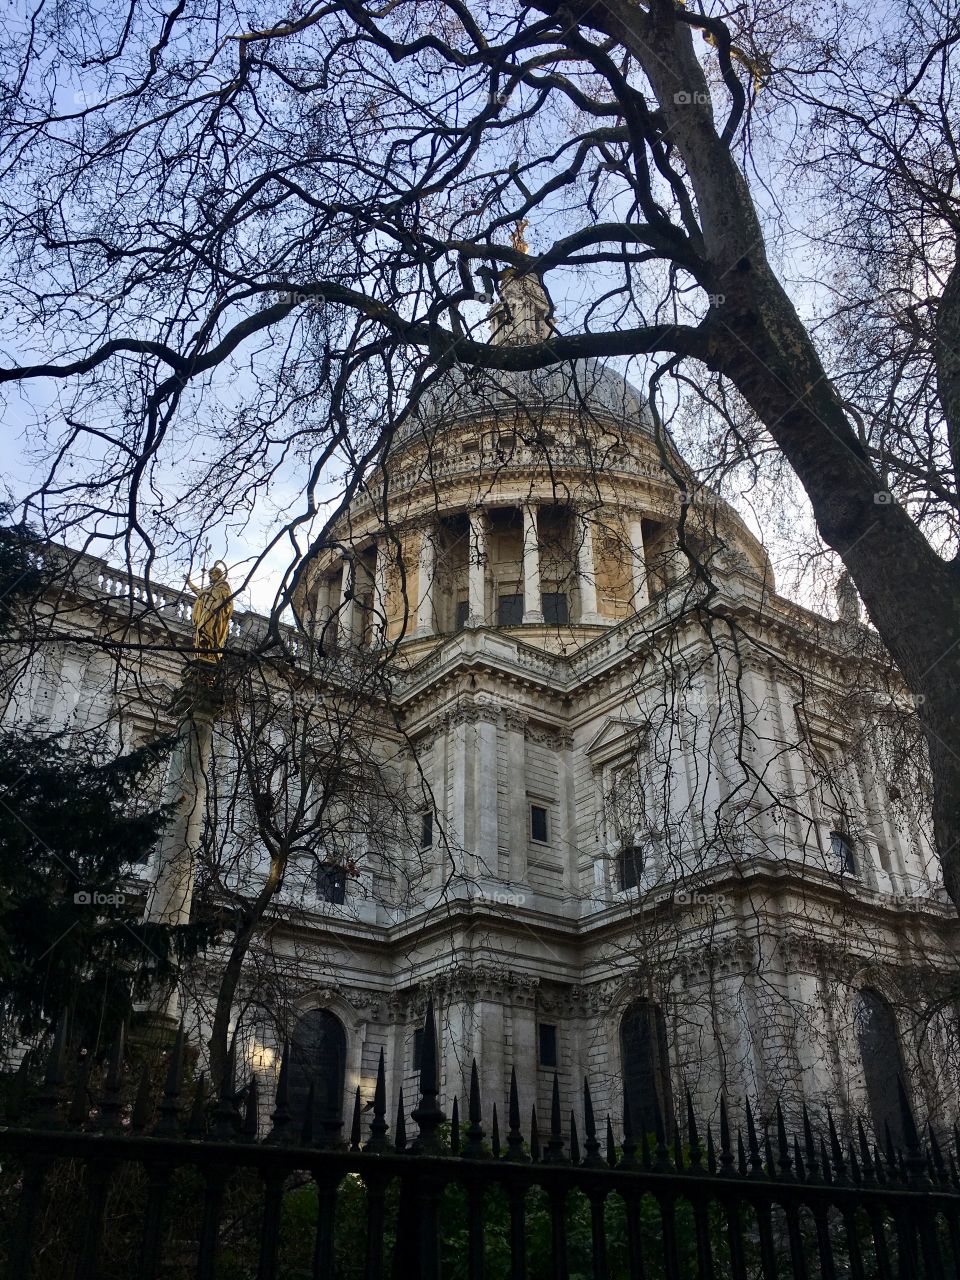 Saint’s Paul Cathedral, London